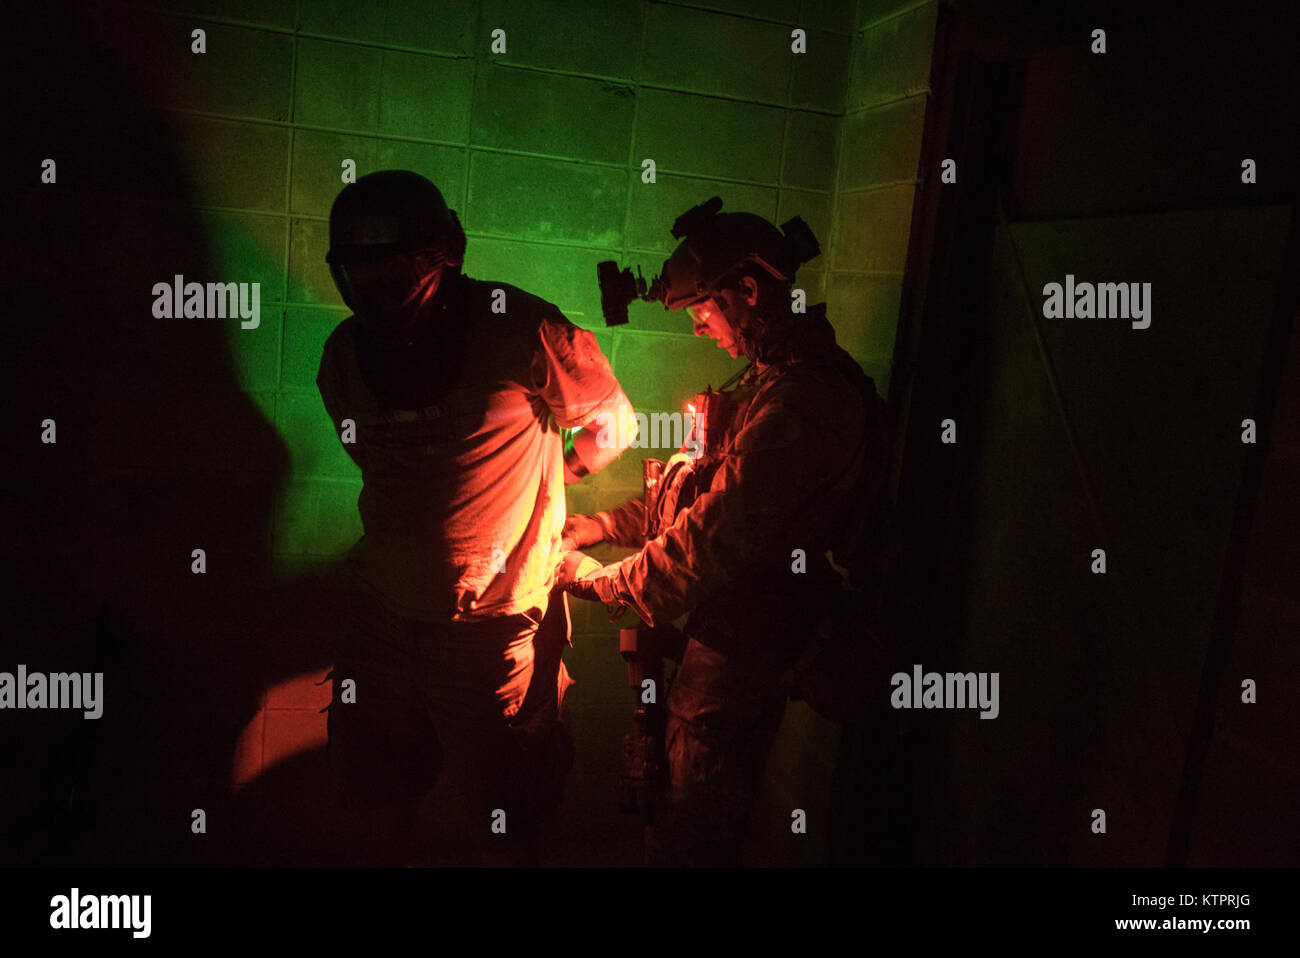 Special Forces personnel identify, treat and process rescued hostages during a noncombatant evacuation exercise at Meridian Naval Air Station, Mississippi Nov. 3, 2015.  Rescue personnel arrived by helicopter to the mock embassy, engaged enemy forces and rescued personnel being held hostage.  This training event allowed  U.S. Army and Air Force to train military members, refine planning and help prepare noncombatants such as U.S. military dependents as well as DoD civilians and their families in the event of a full-scale evacuation order from the U.S. Department of State.  Exercise Southern St Stock Photo